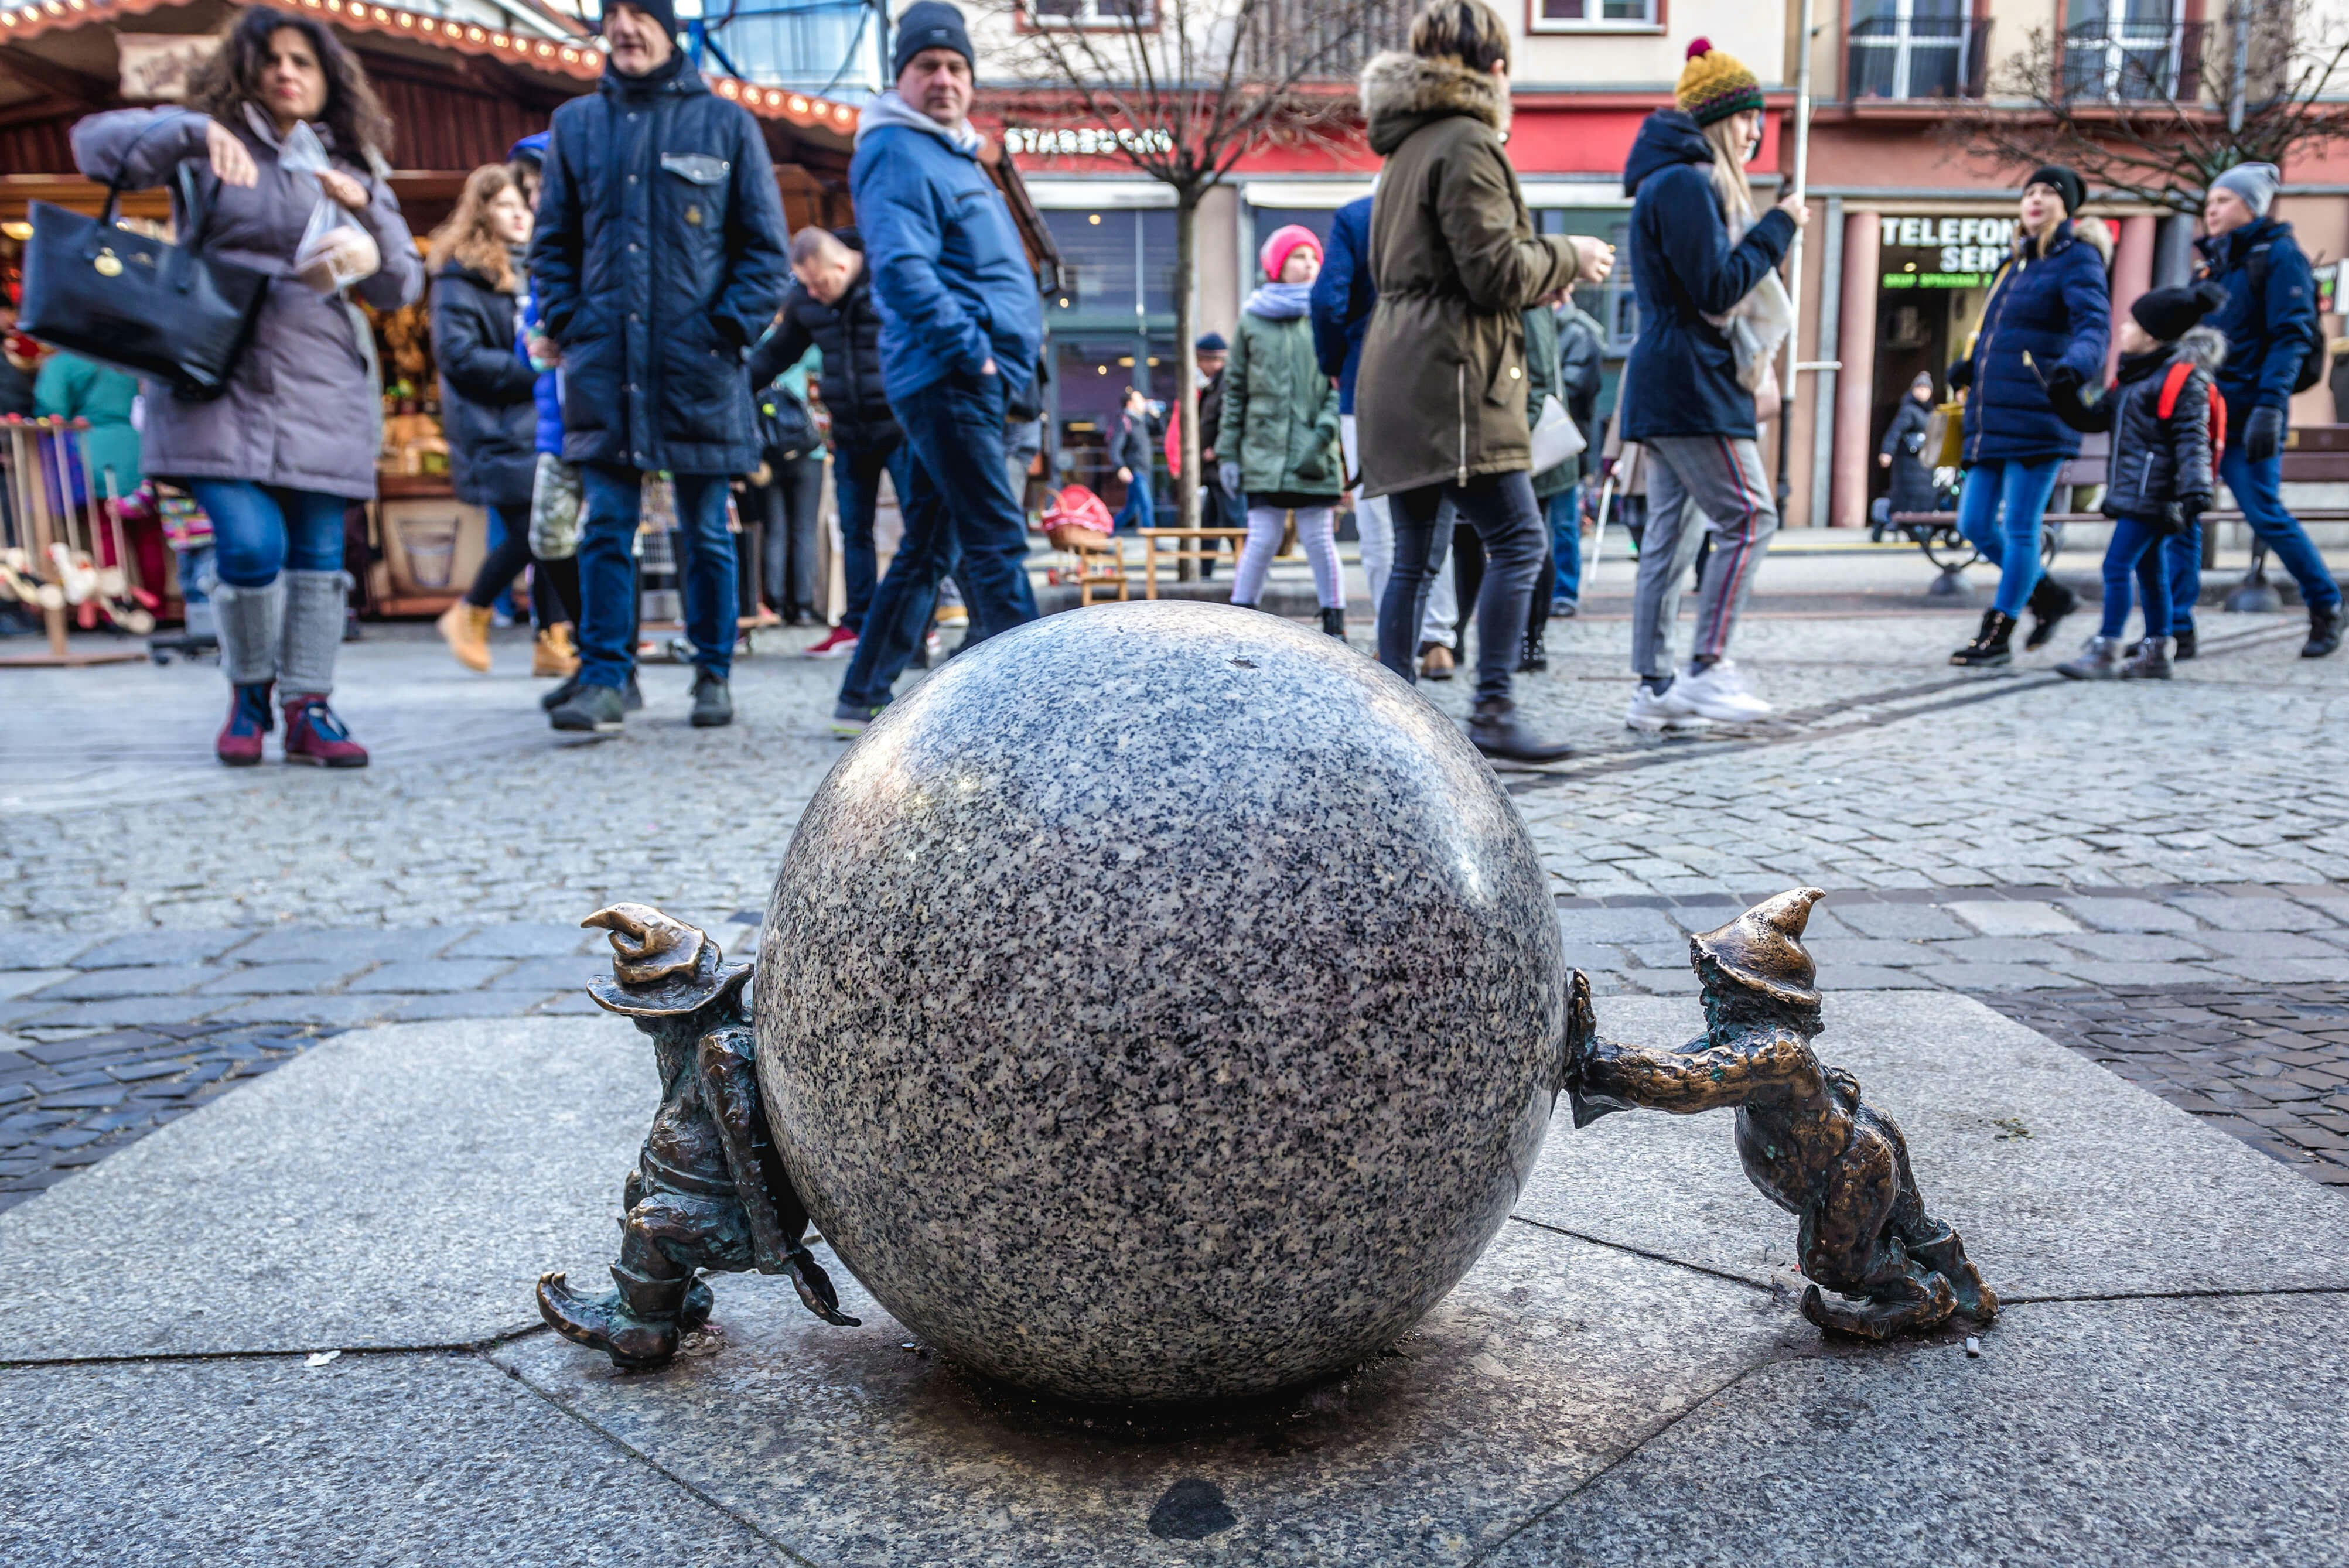 Two small dwarf statues on either side of a round marble ball, both pushing inward, with a tourist crowd looking at them in the background